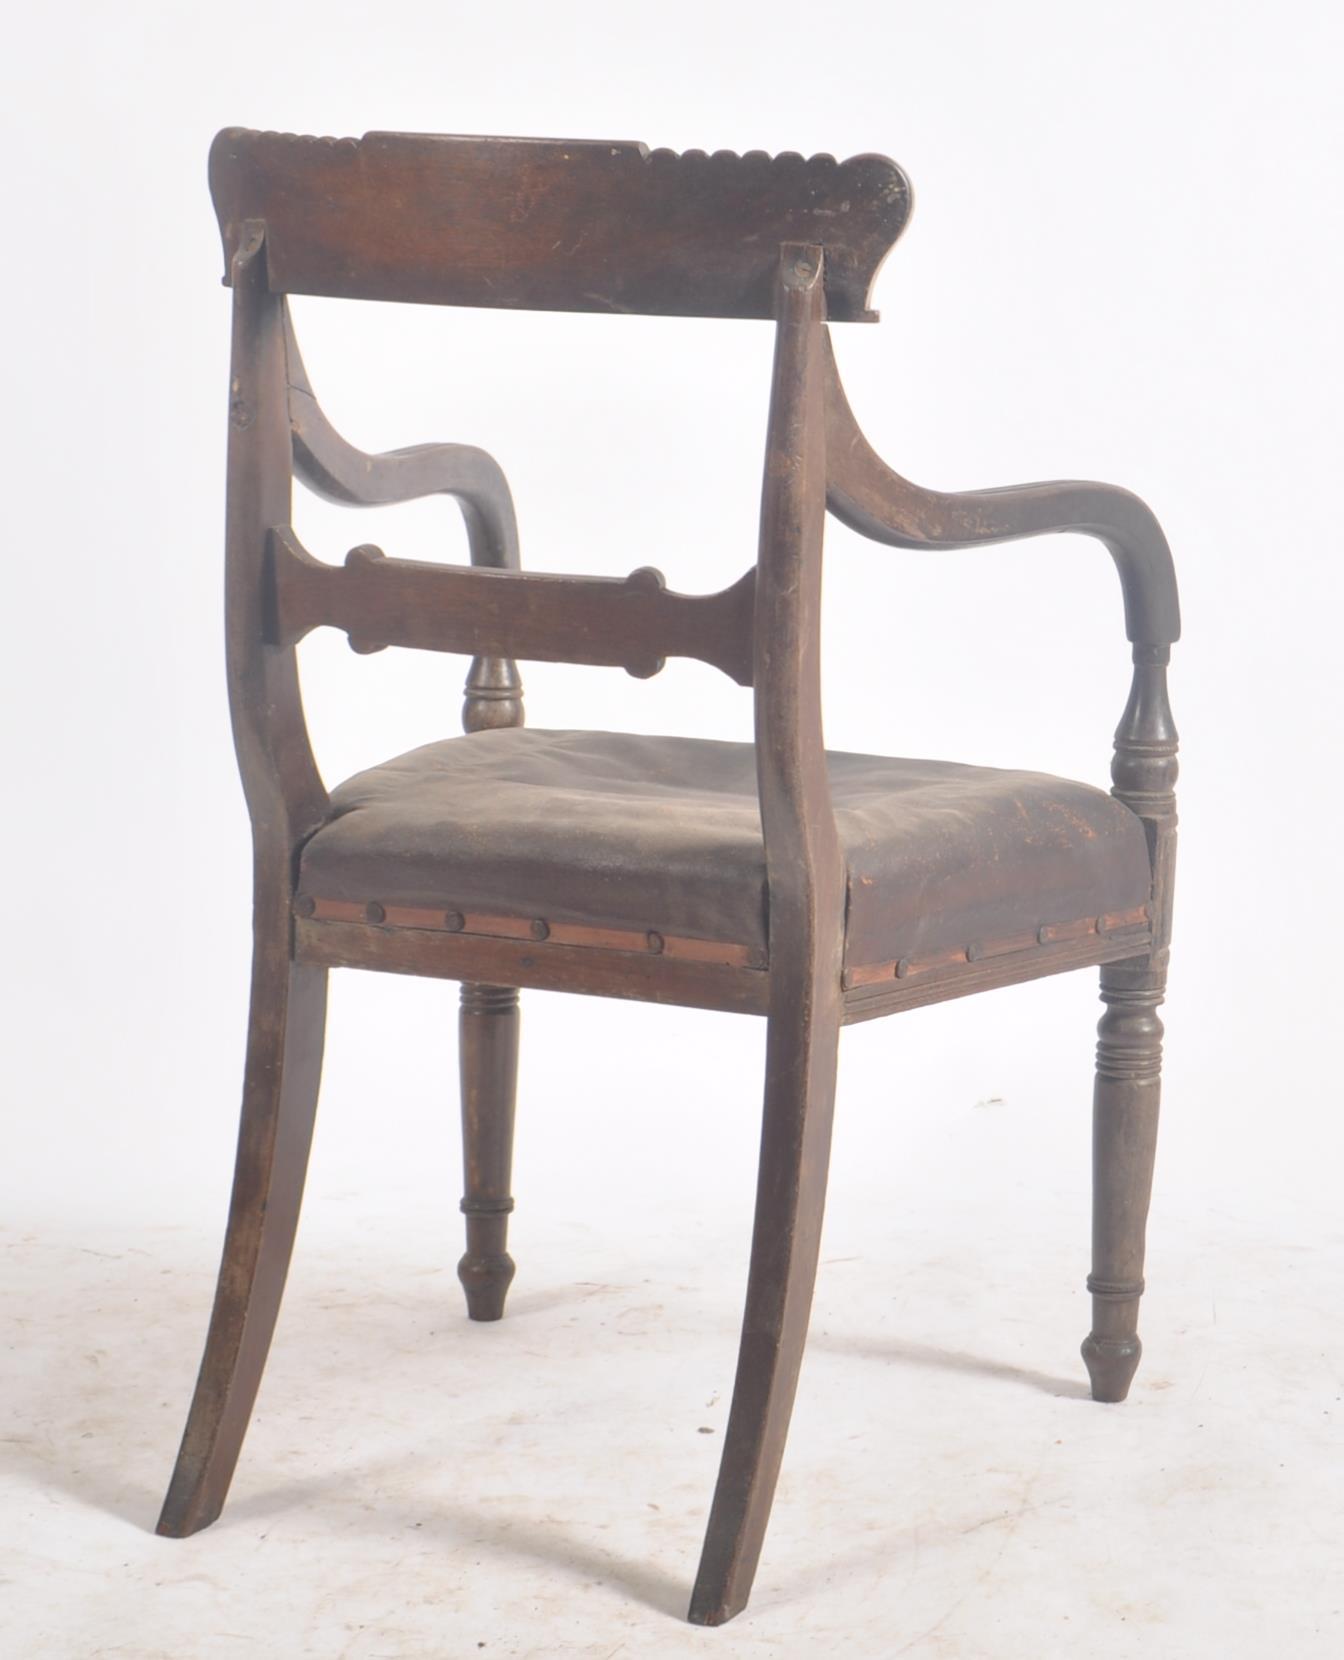 EARLY 19TH REGENCY PERIOD MAHOGANY CARVER DINING CHAIR - Image 5 of 6